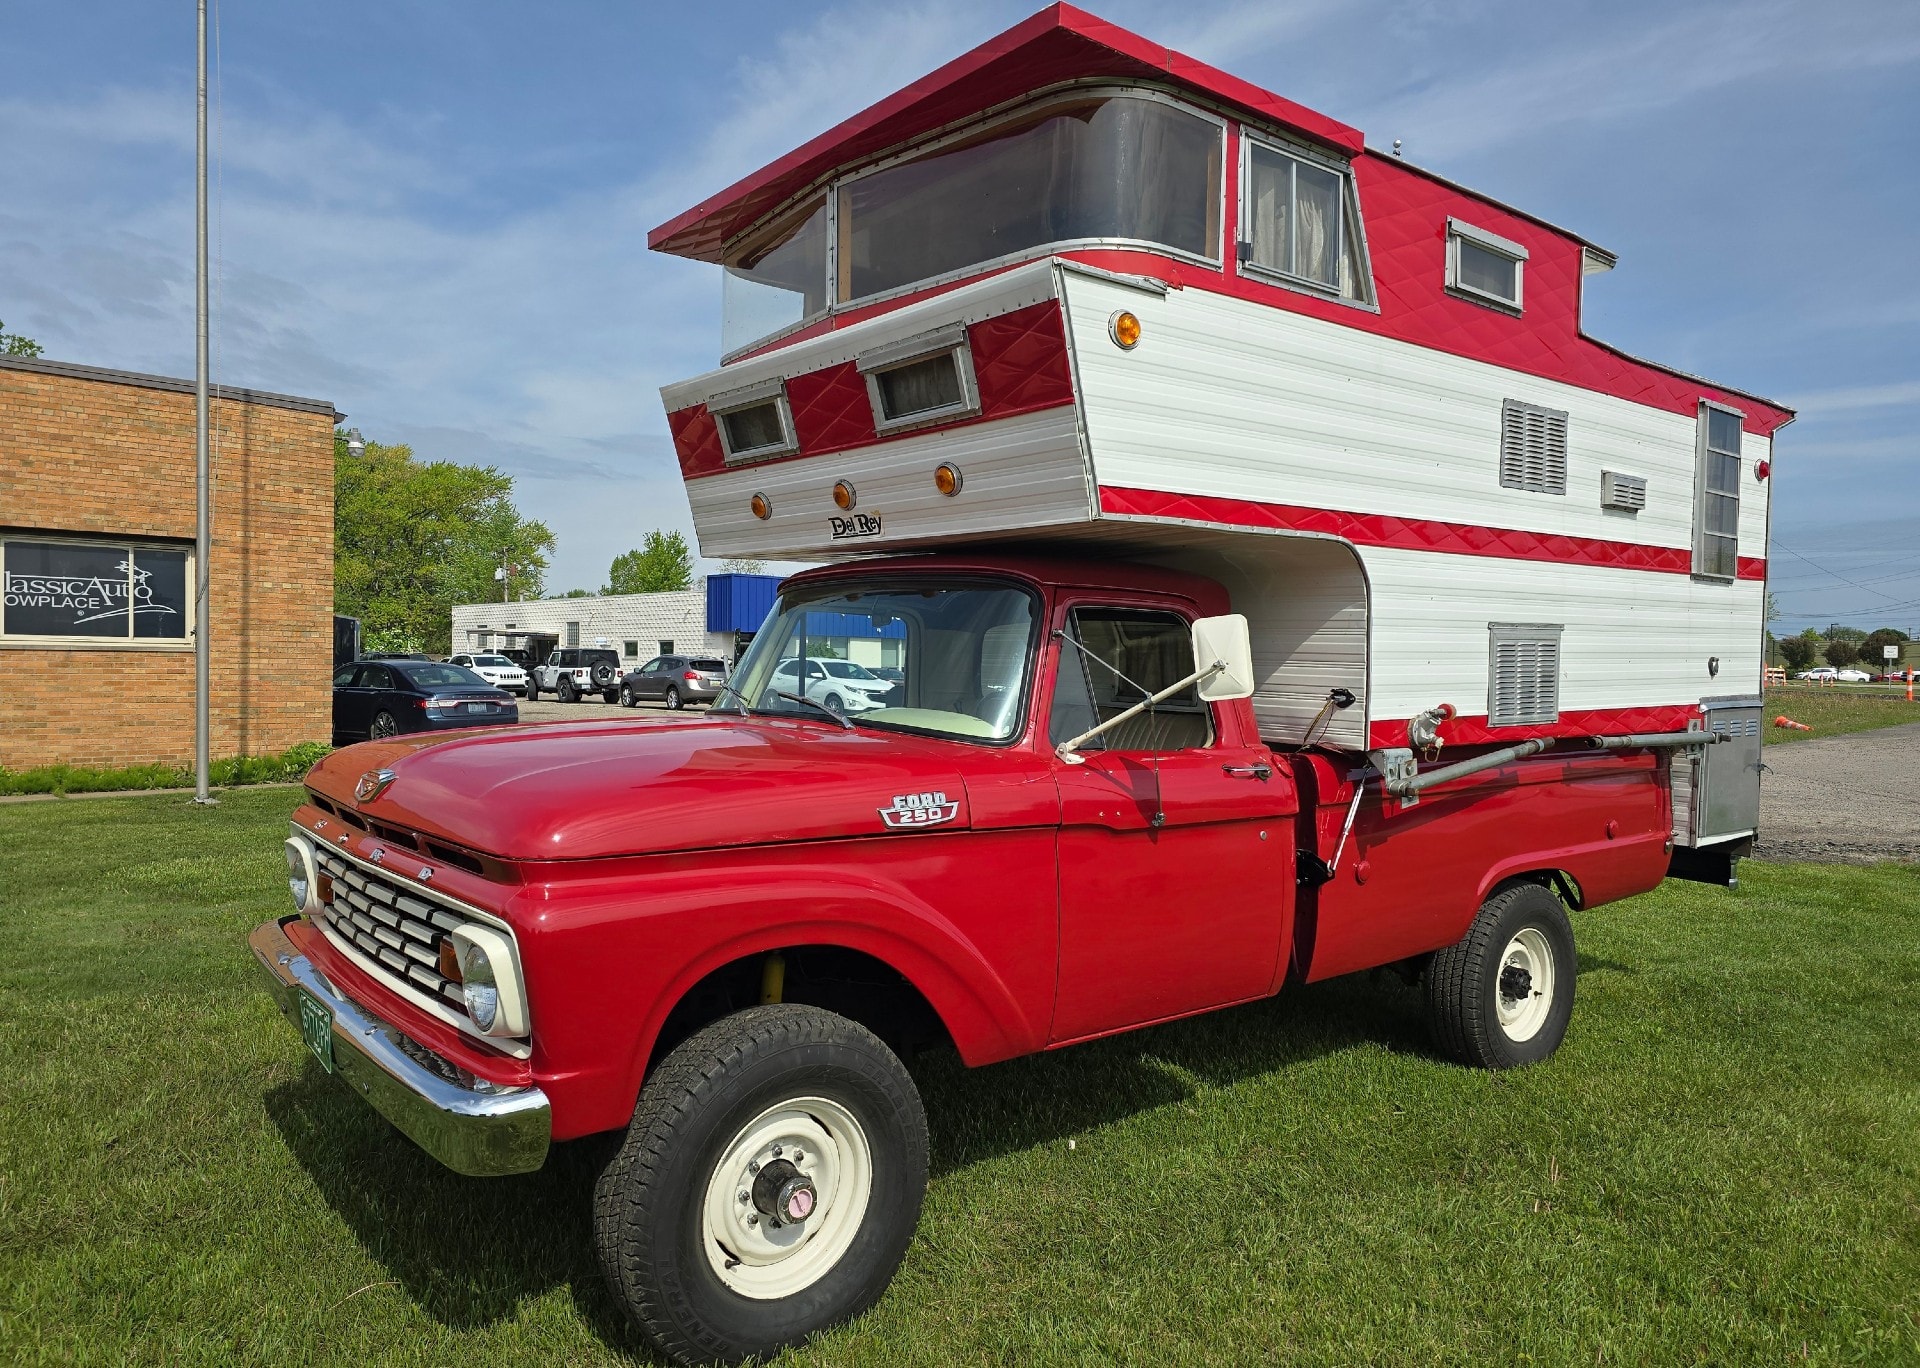  Custom '63 Ford F100's Now Married to a Del Rey Sky Lounge Camper, Sports 460 V8 